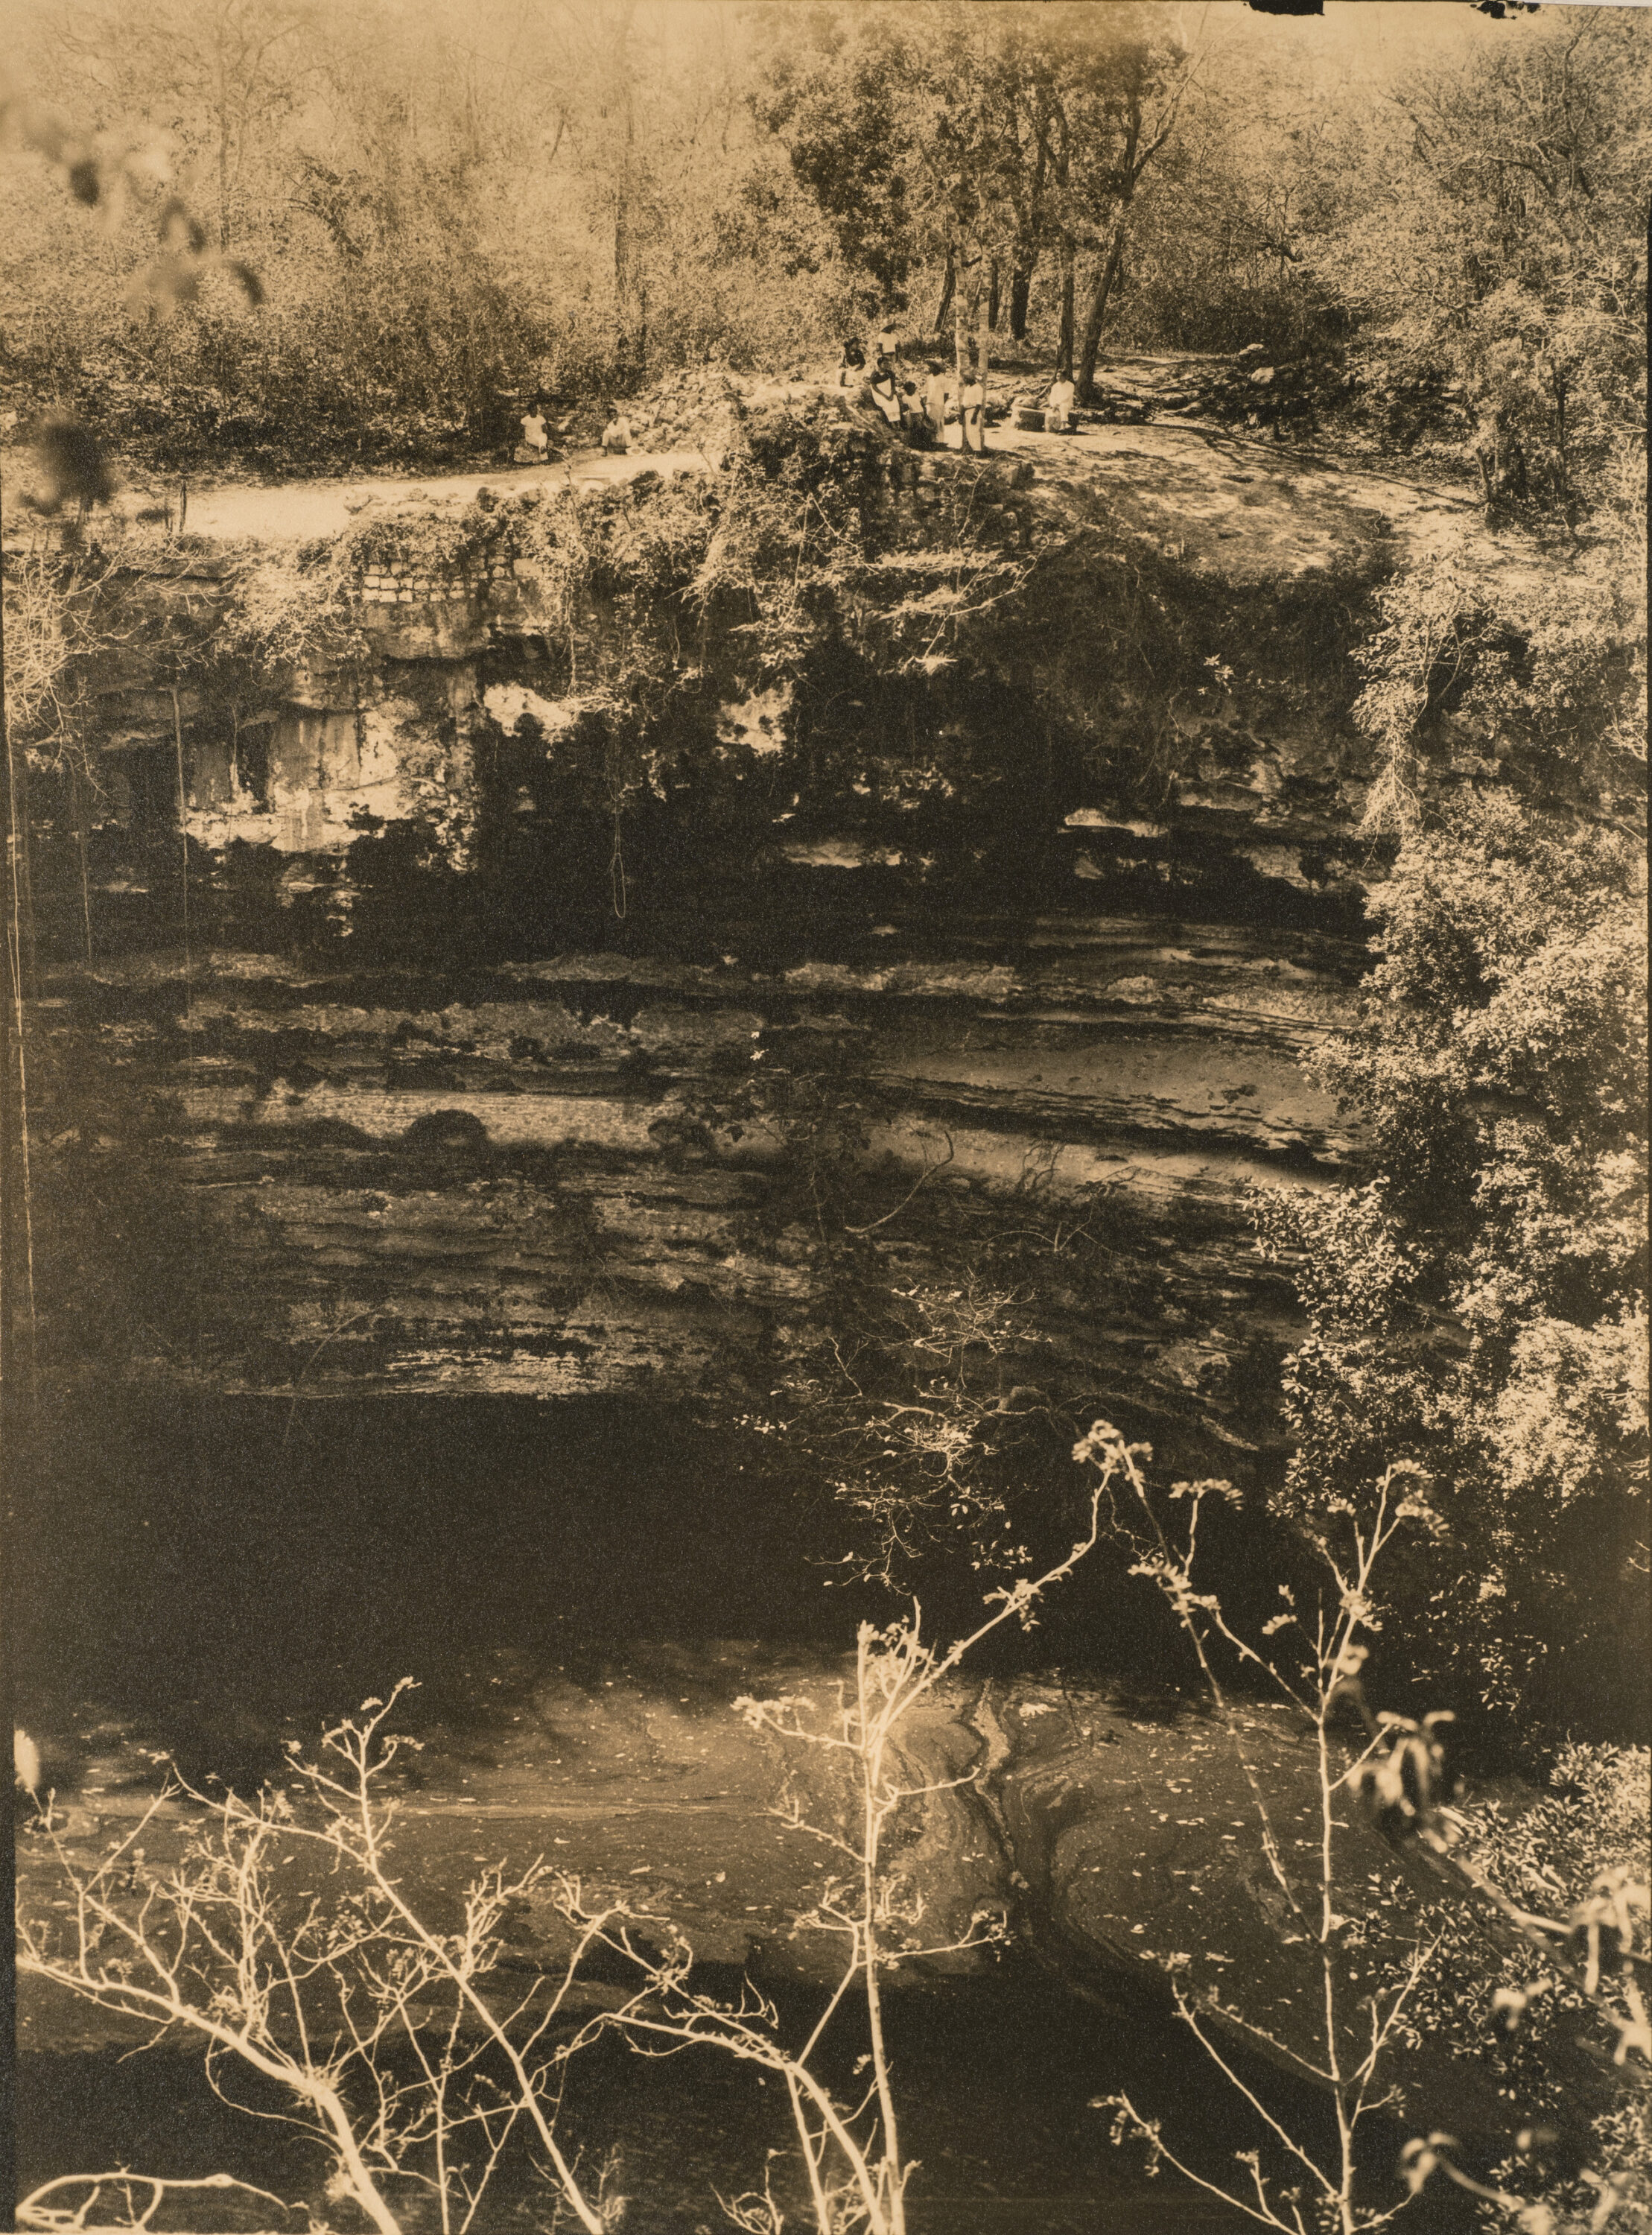 A sepia-toned vintage photograph of a pool of water below a vertical surface of natural rock. A group of figures dressed in white stand and sit on the flat space of ground at the top of the rock face.